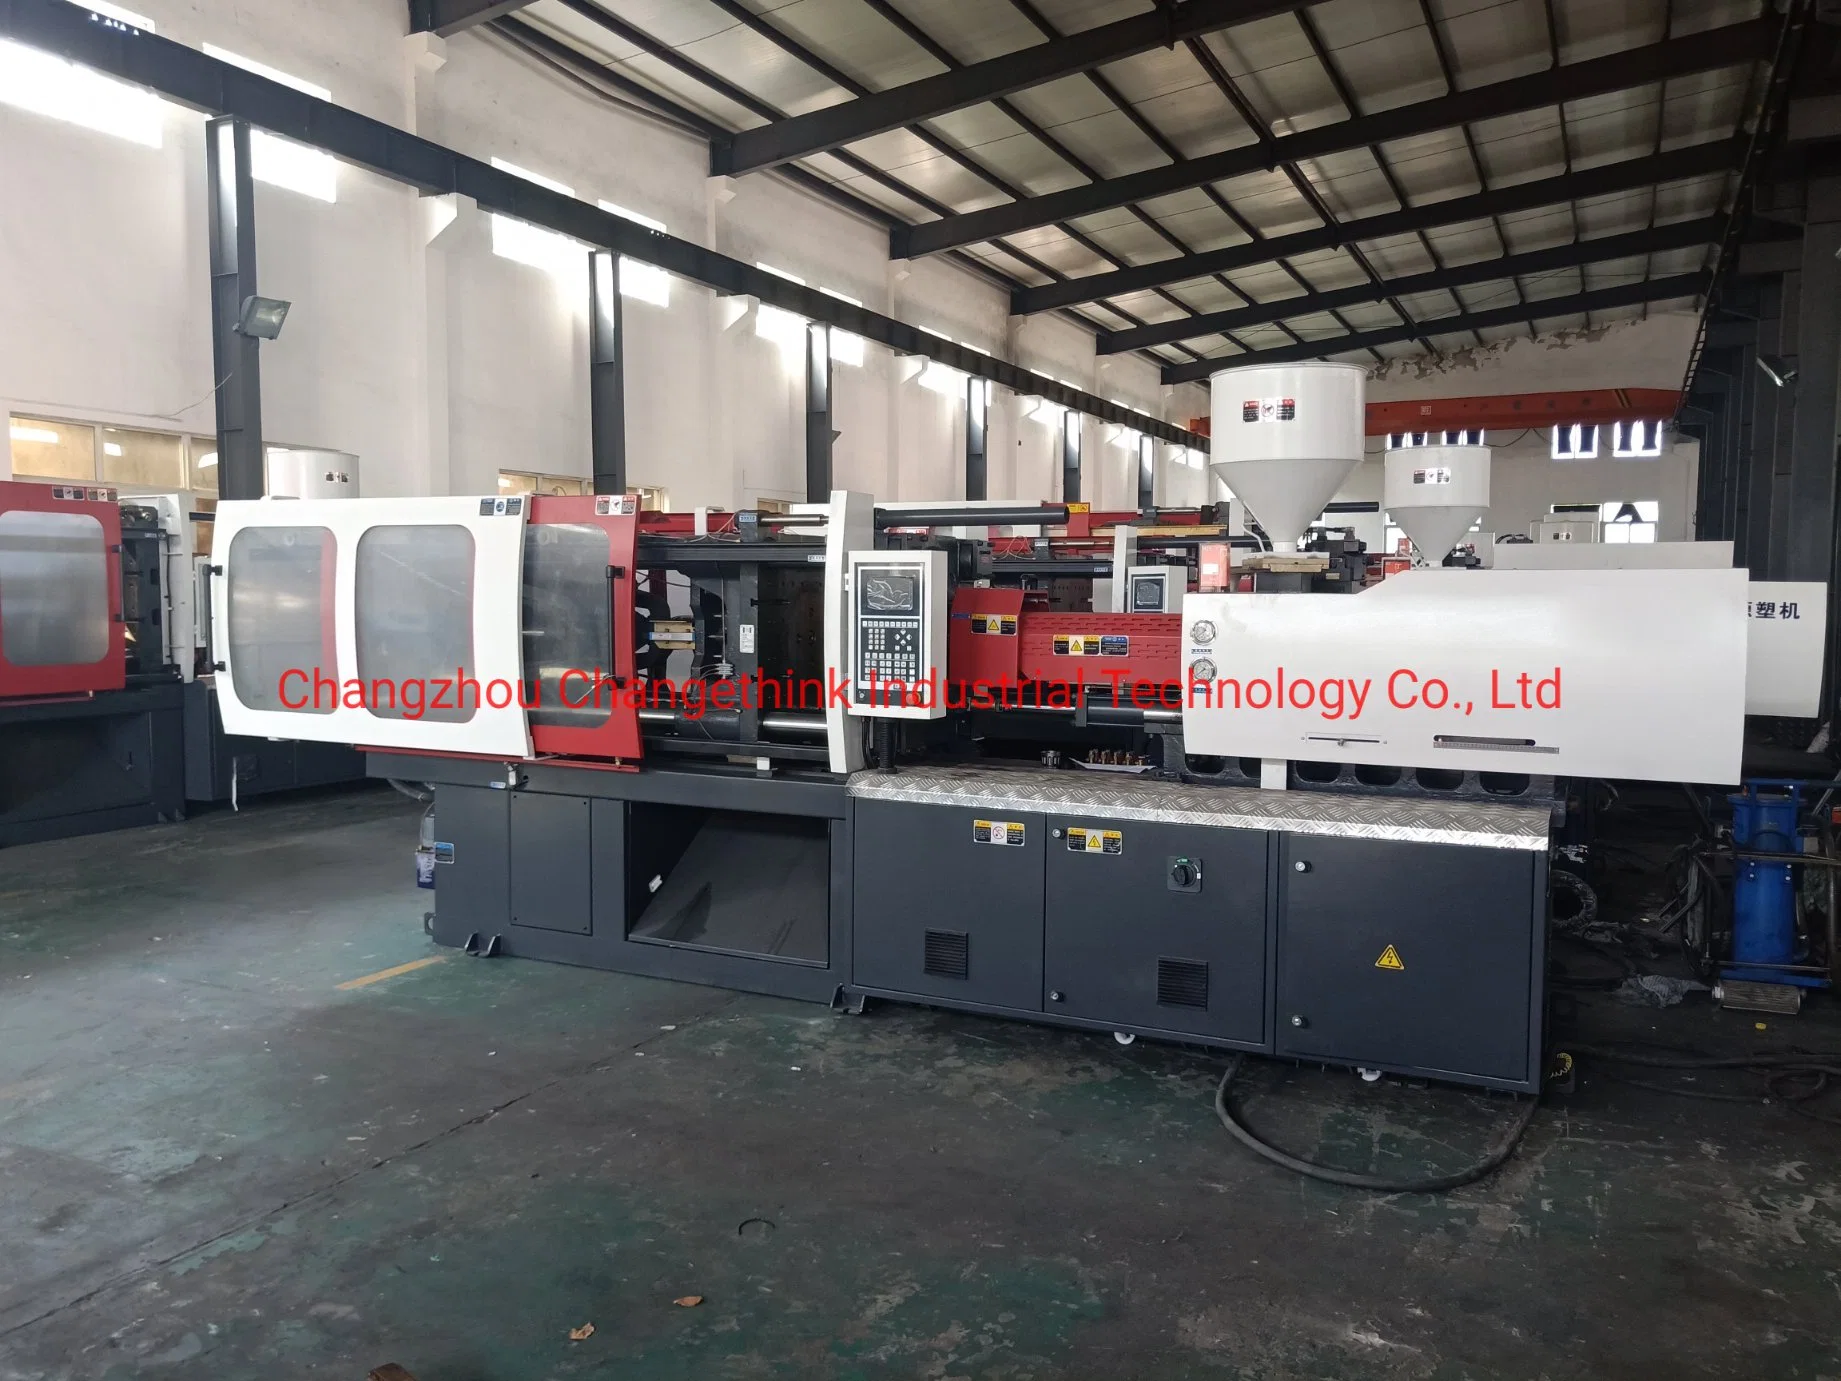 Lty-2500 Plastic Injection Molding Machine for PP and PE Plasitc